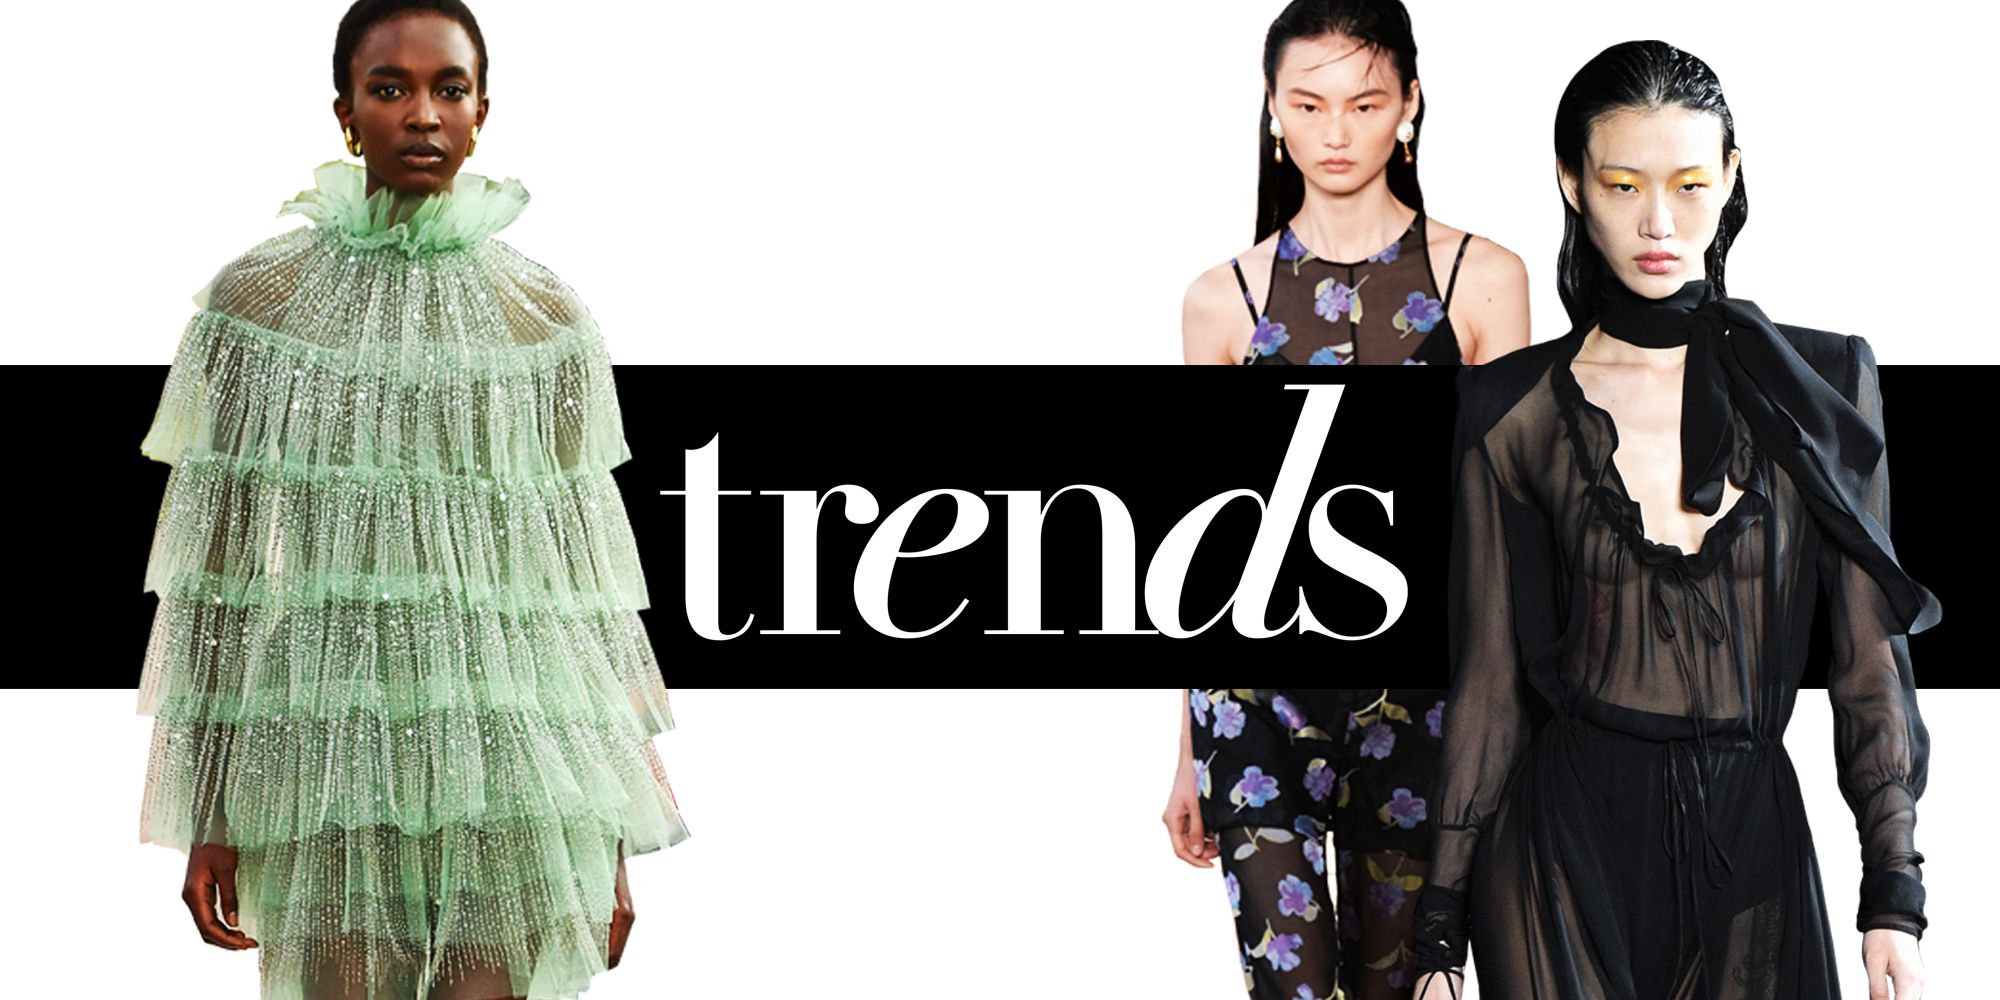 Here's How To Ace The Sheer Top Trend, According To Instagram Girls